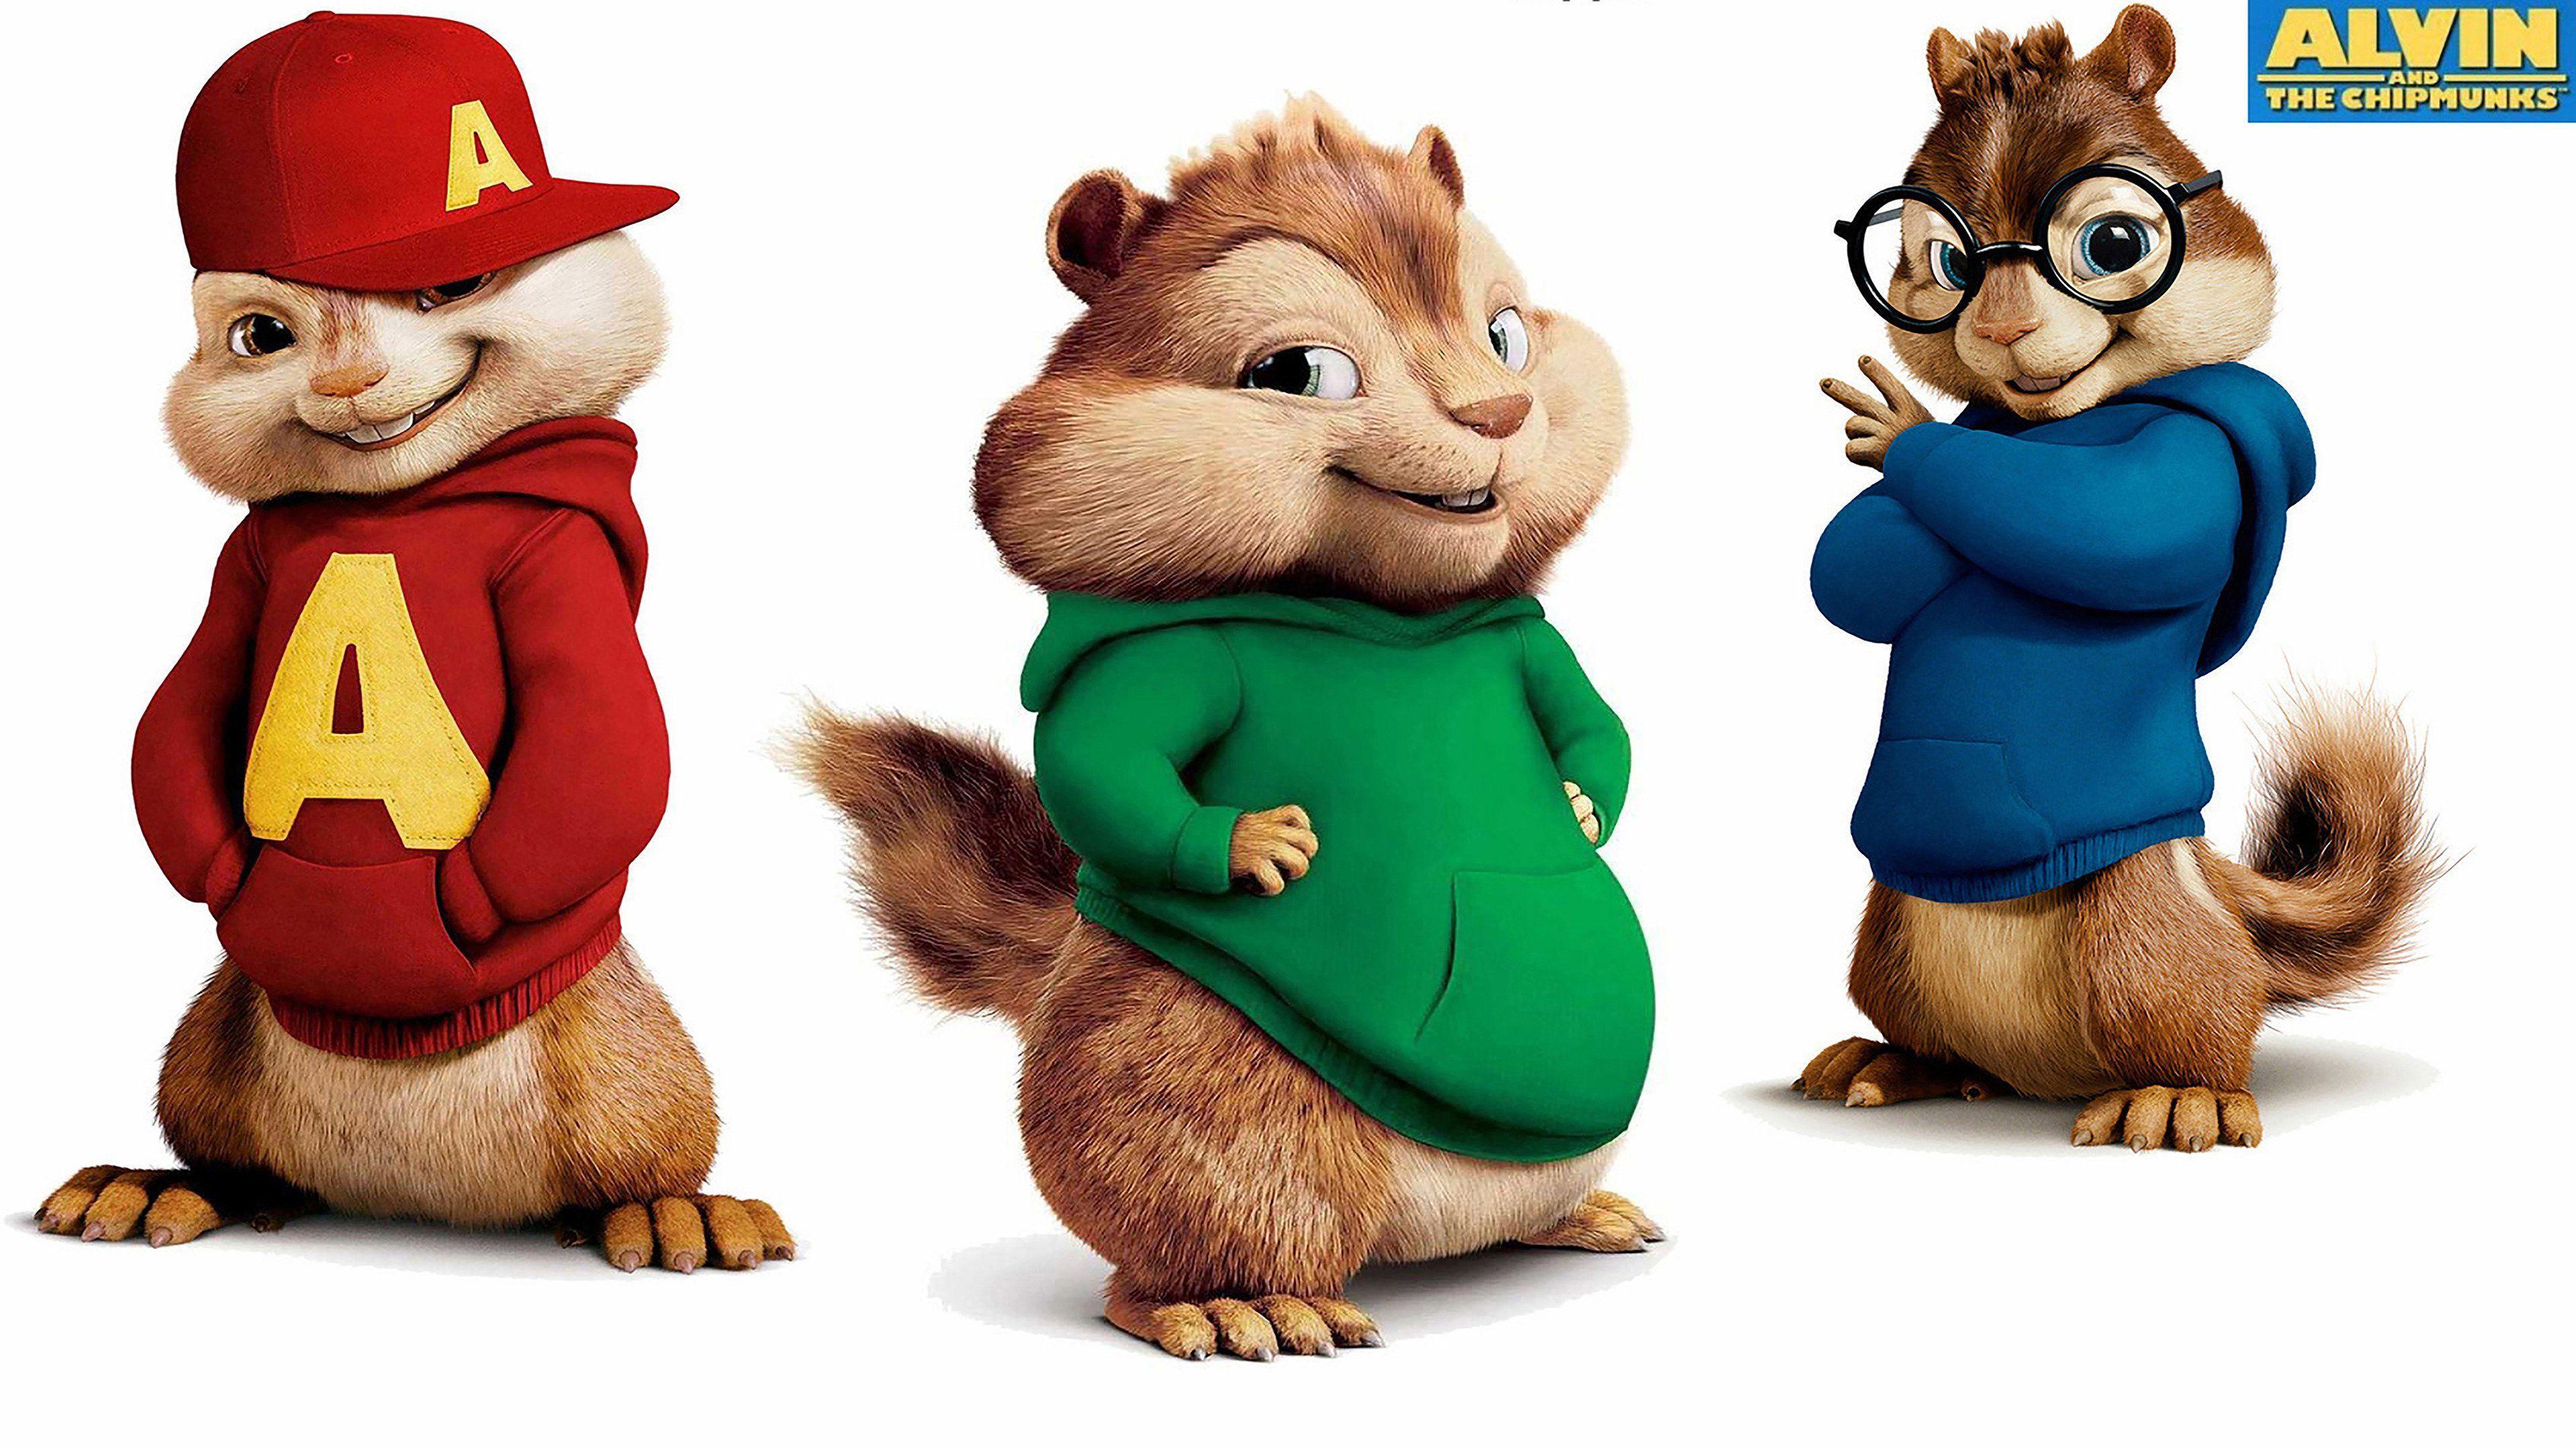 Alvin And The Chipmunks, Full HD Alvin And The Chipmunks.